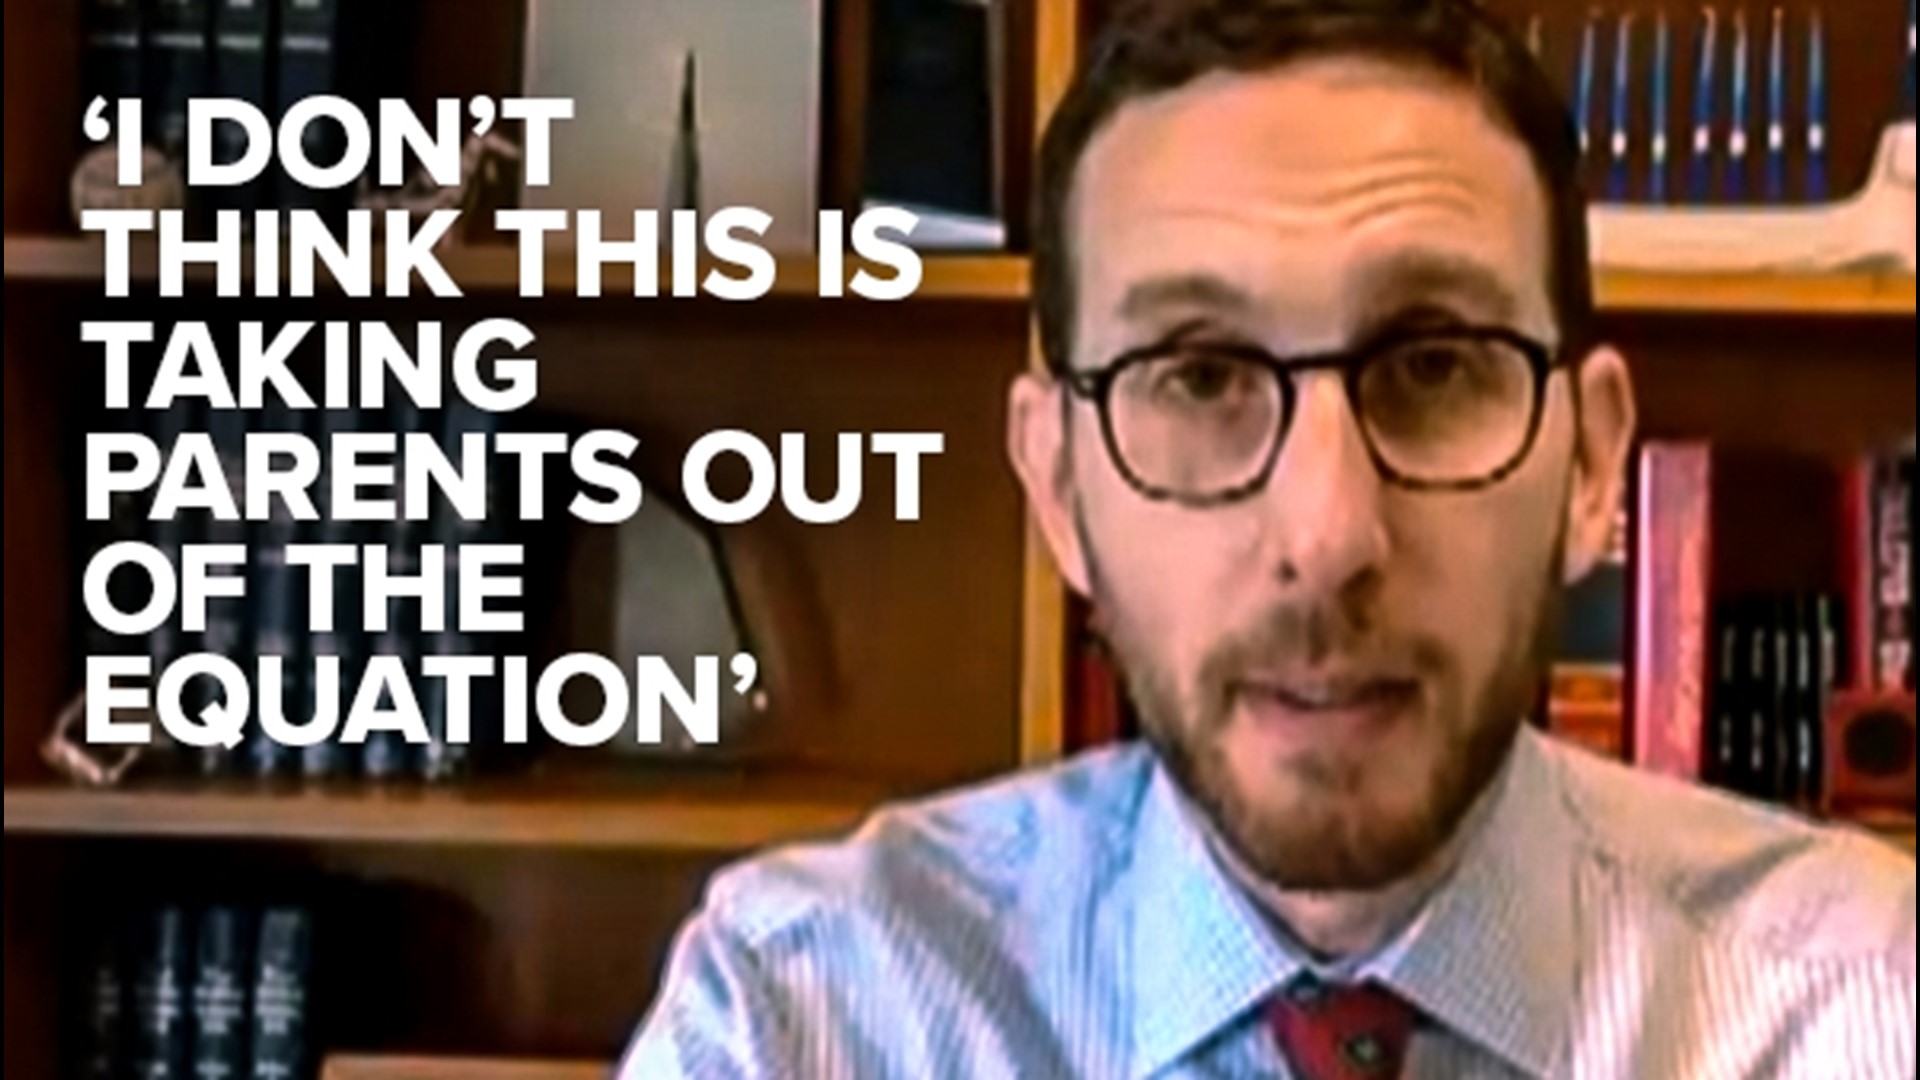 Instead, California State Senator Scott Wiener compromised with Democrats in the Assembly, raising the proposed minimum age to 15 years old.